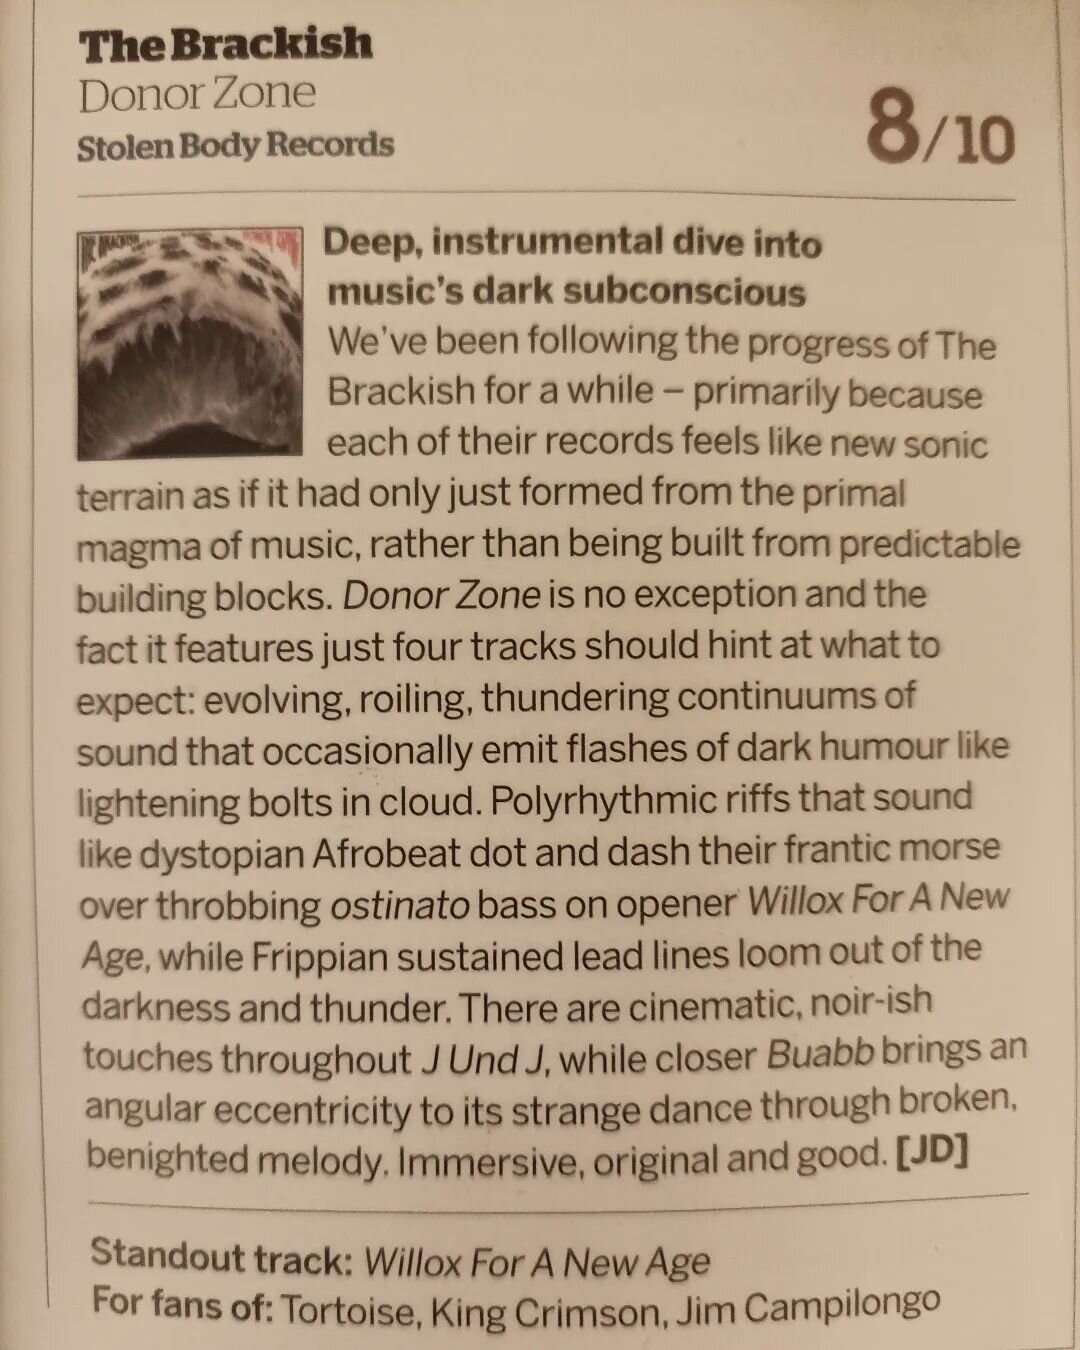 Thanks a lot @guitarist_mag for this great review of our album 'Donor Zone'!